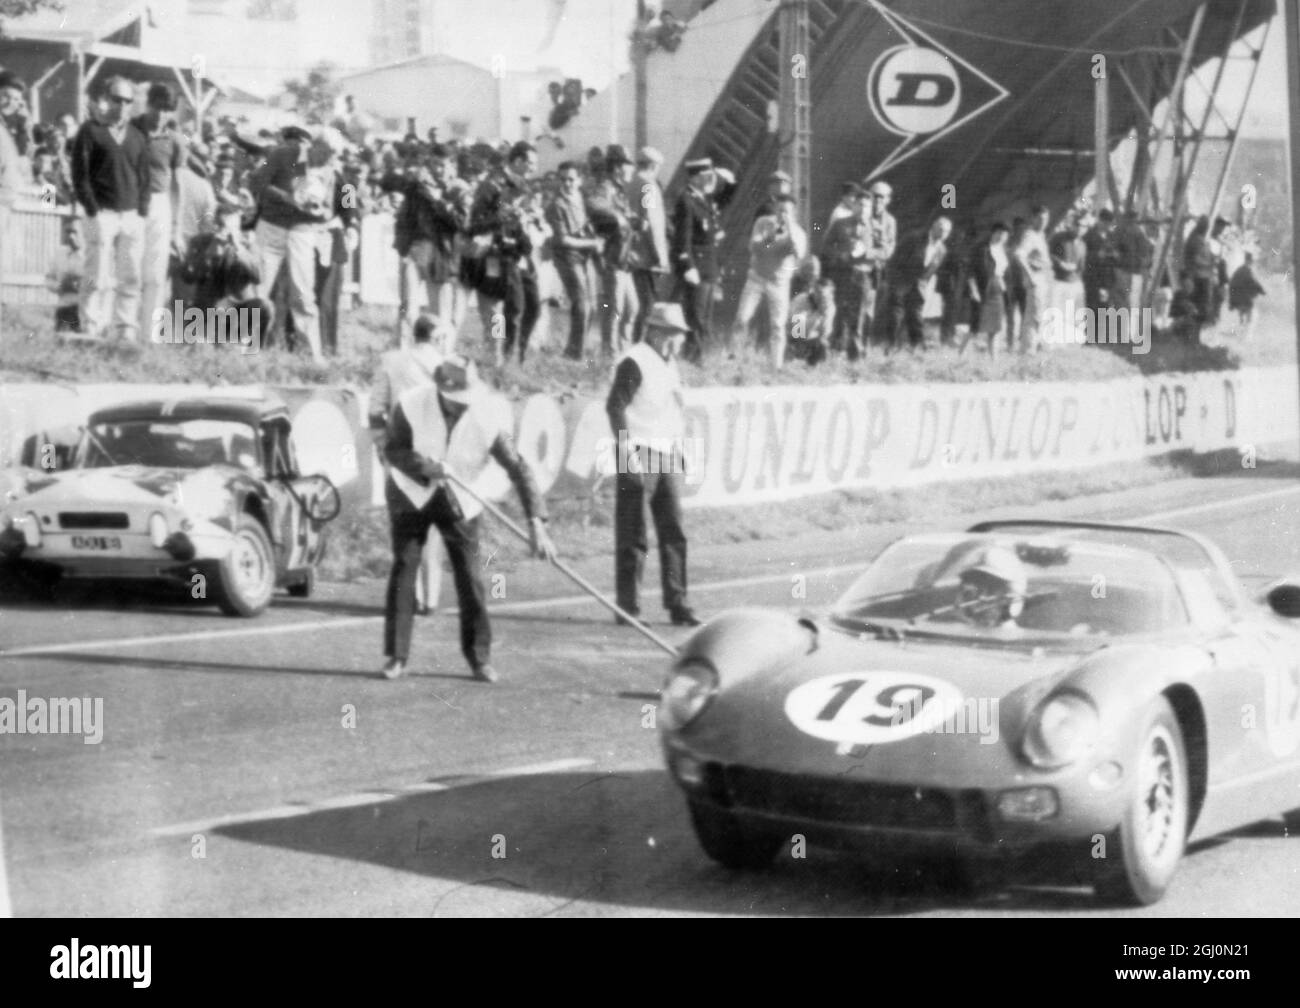 John Surtees in his Ferarri leading after 33 laps flashing past Mike Rothschild's crumpled Triumph Spitfire which crashed into the wall, after it is thought a tyre blew. 20 June 1964 Stock Photo